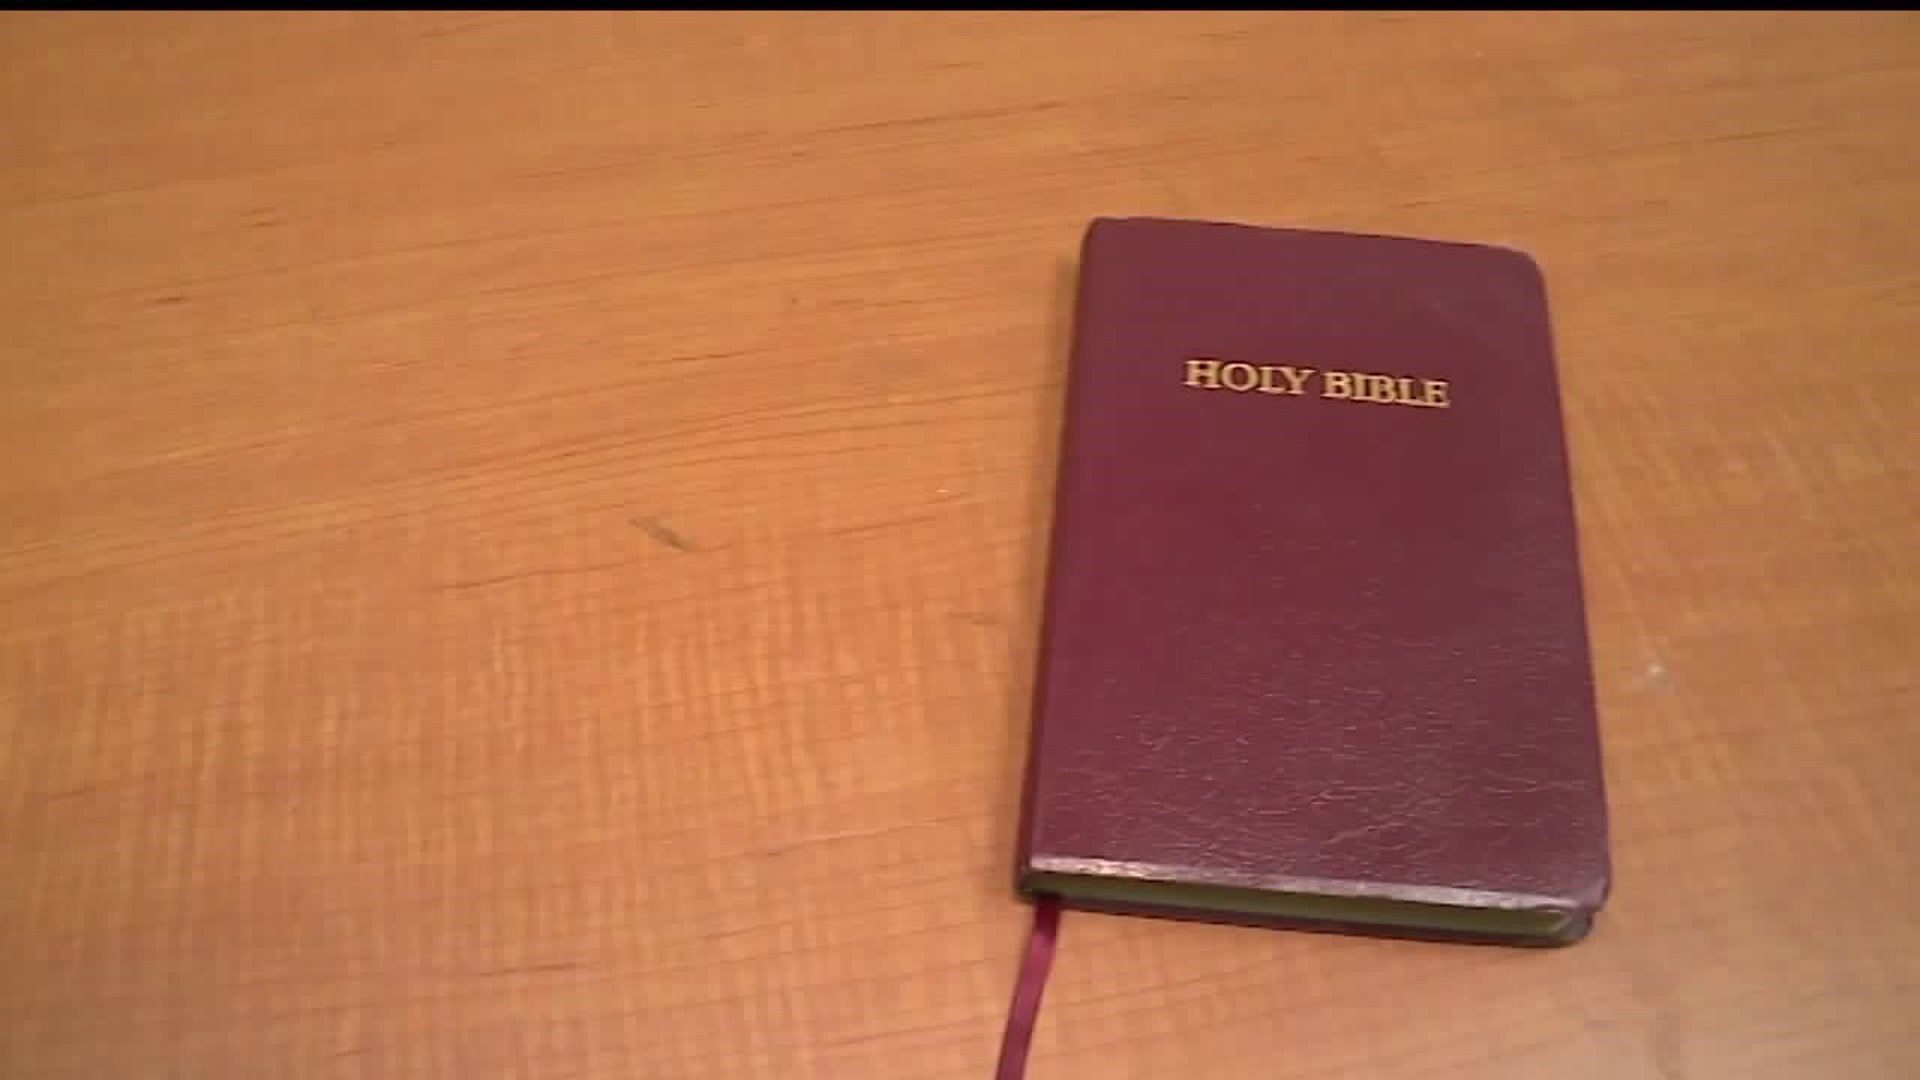 Lawsuit filed against Mechanicsburg Area School District following bible controversy